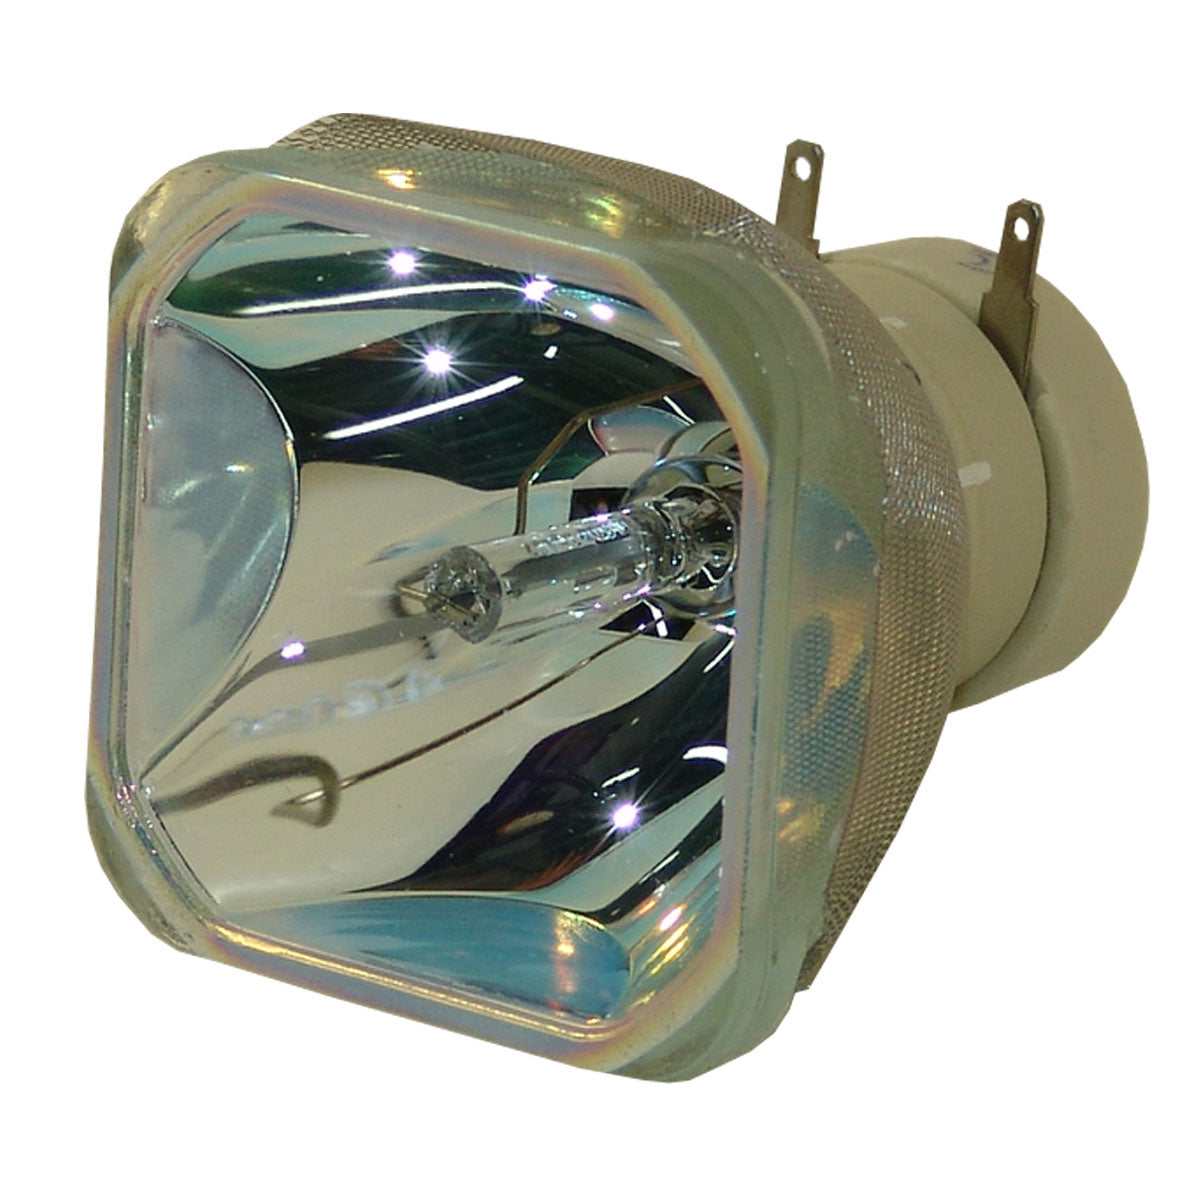 Philips 9284 469 05390 Philips Projector Bare Lamp